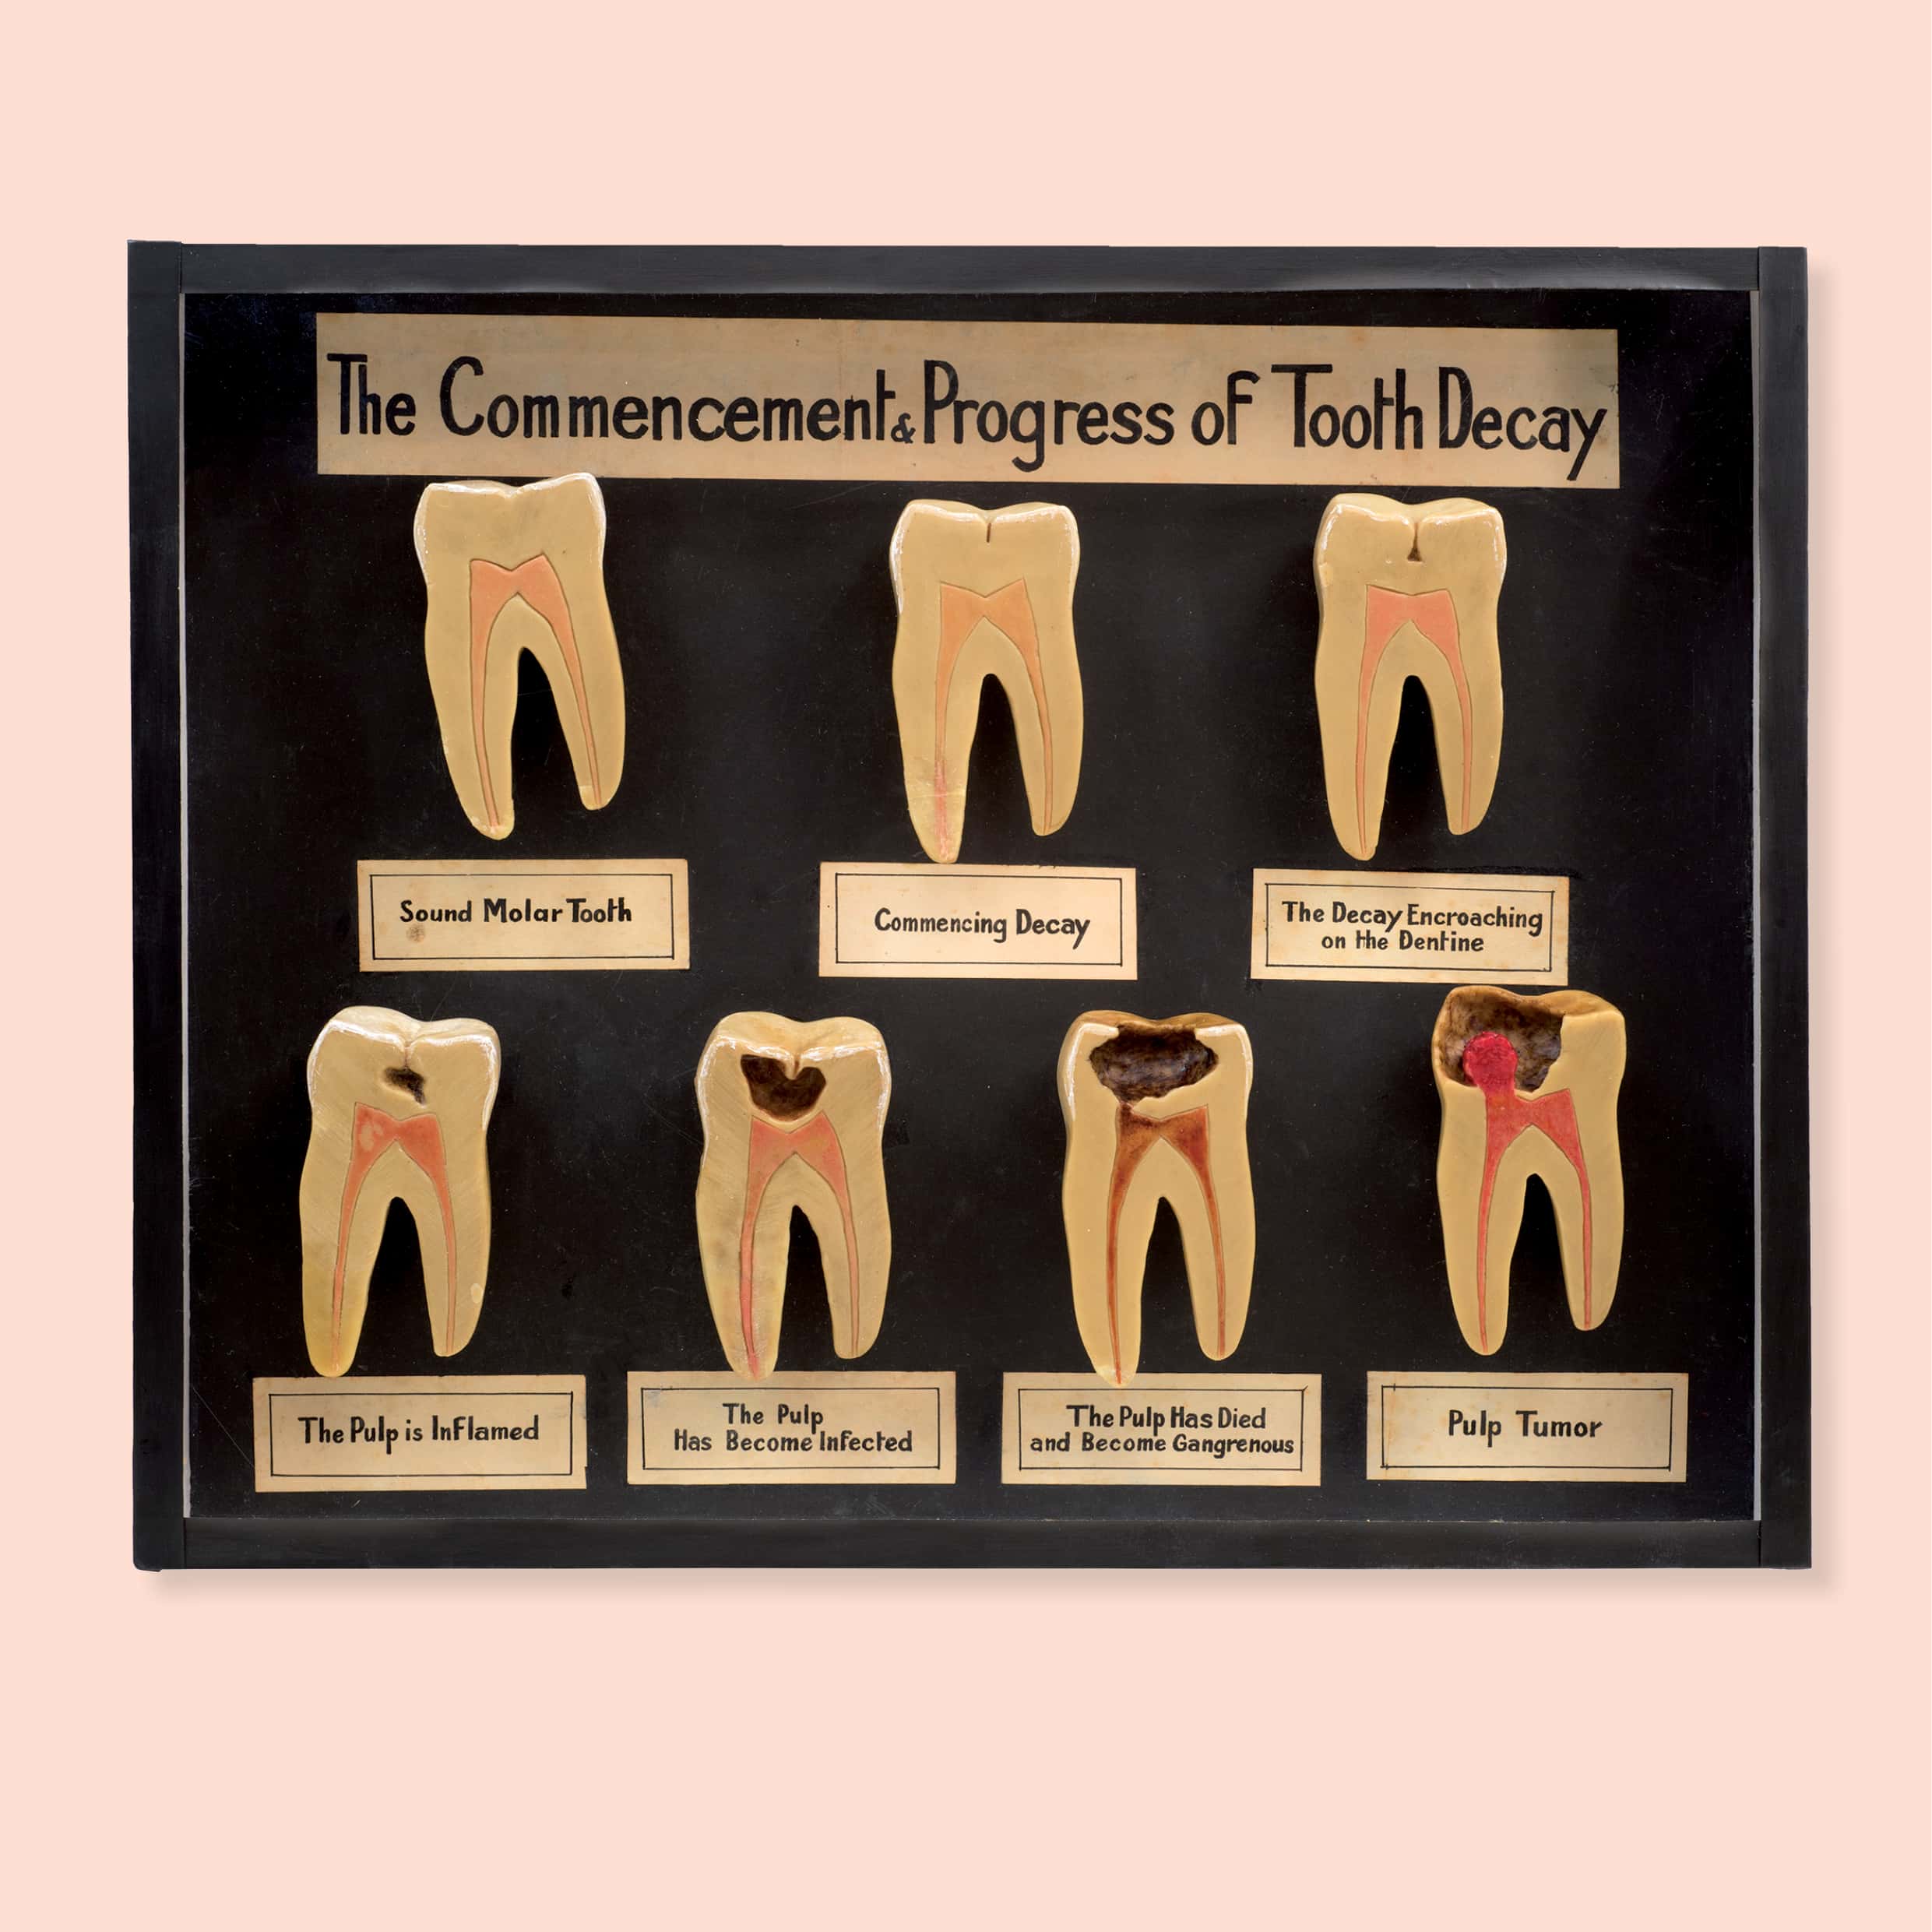 Charles Harold Down (1890–1965), Molar models in case: The commencement & progress of tooth decay, c. 1930, wax, paint, paper, ink, wood, glass; 40.0 × 50.5 × 6.0 cm. HFADM 2574, gift of the Australian College of Dentistry 1963, Henry Forman Atkinson Dental Museum, University of Melbourne. 